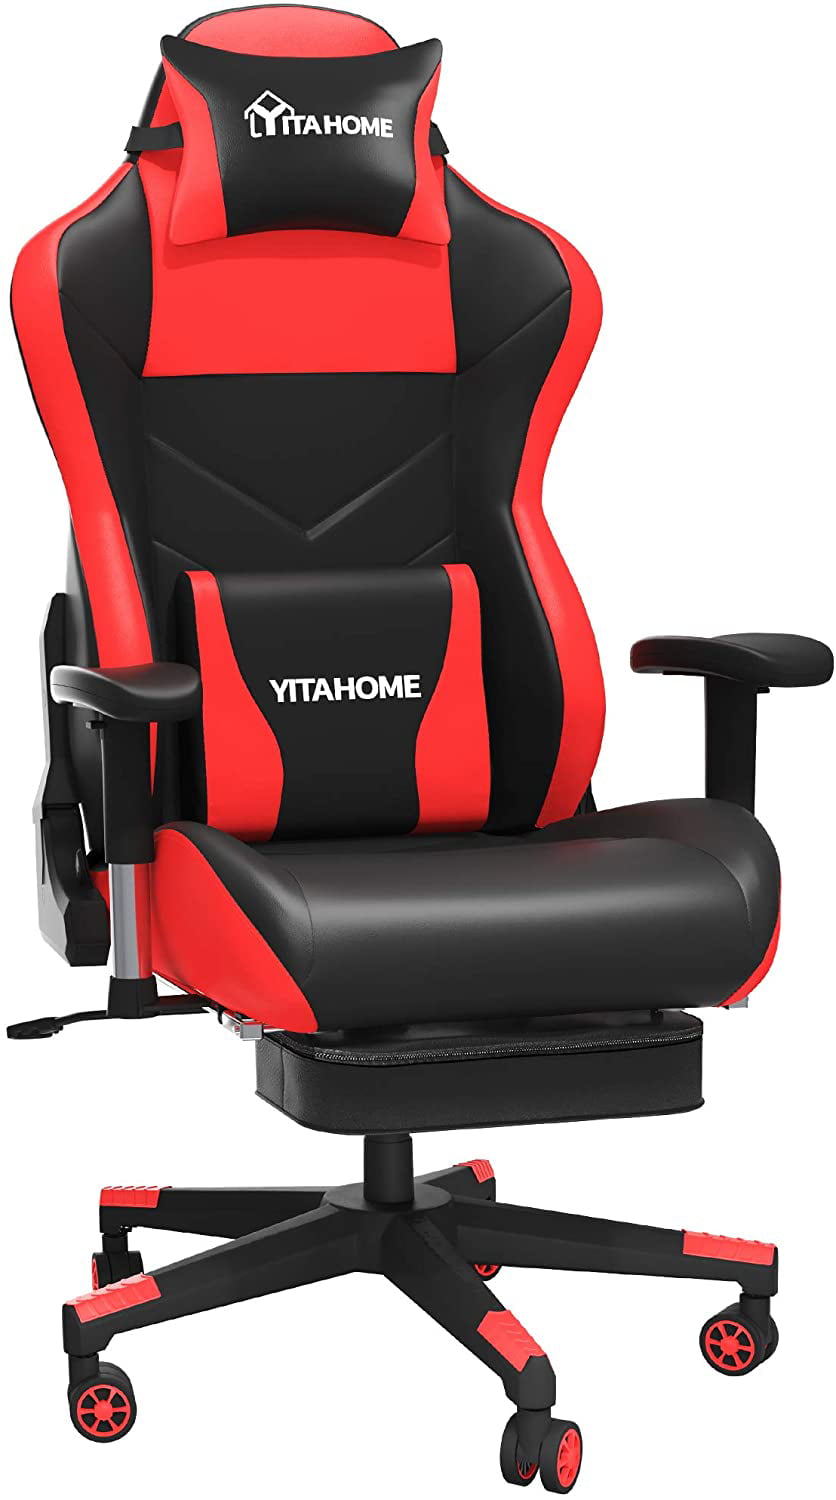 YITAHOME Office Home Computer Gaming Chair with Footrest Swivel Ergonomic Chair 